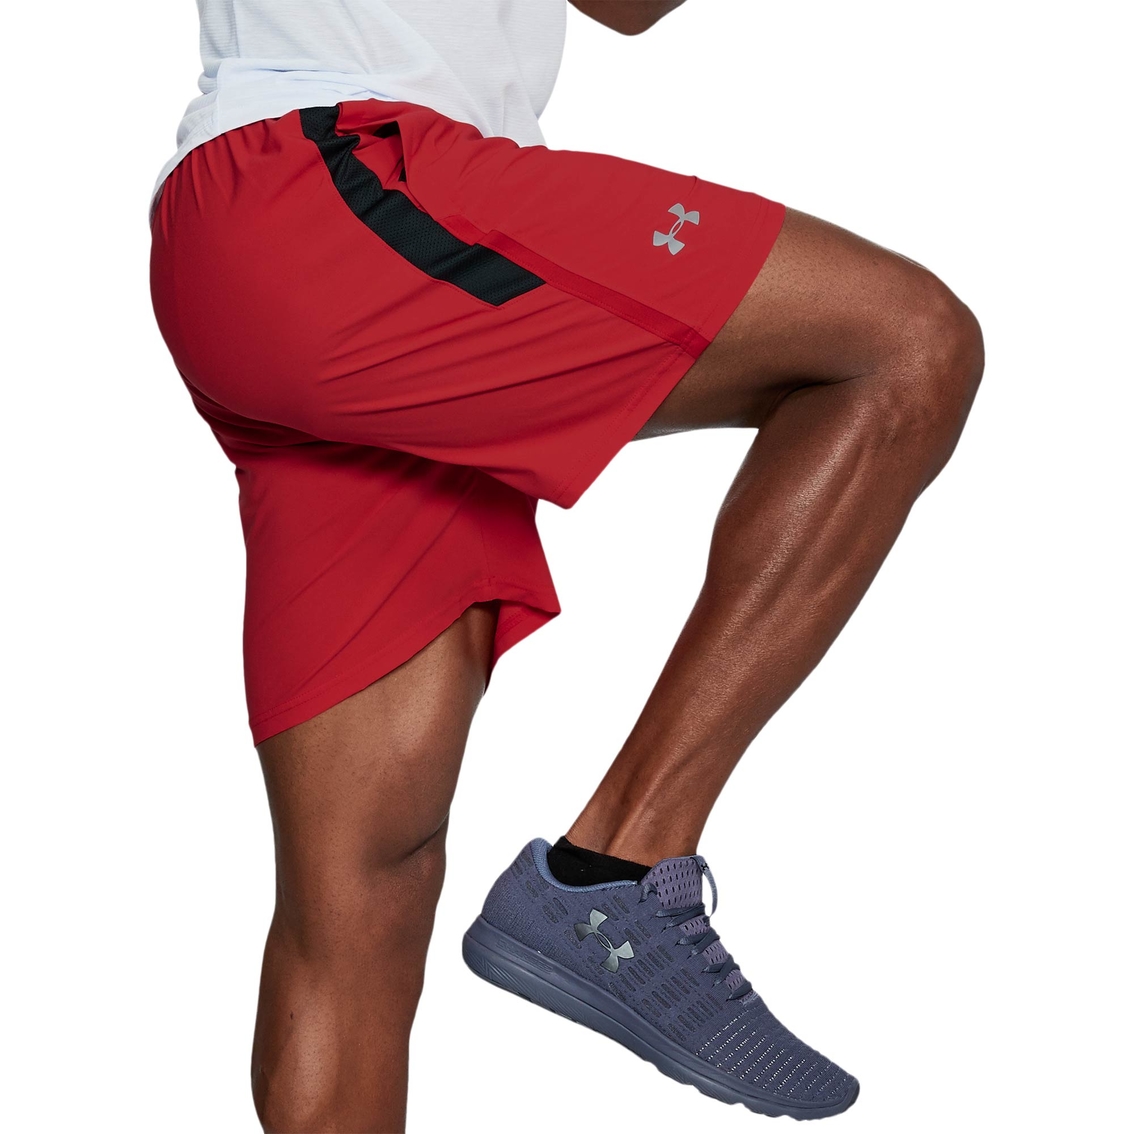 Under Armour Men's Launch Stretch Woven 7 in. Shorts - Image 3 of 3